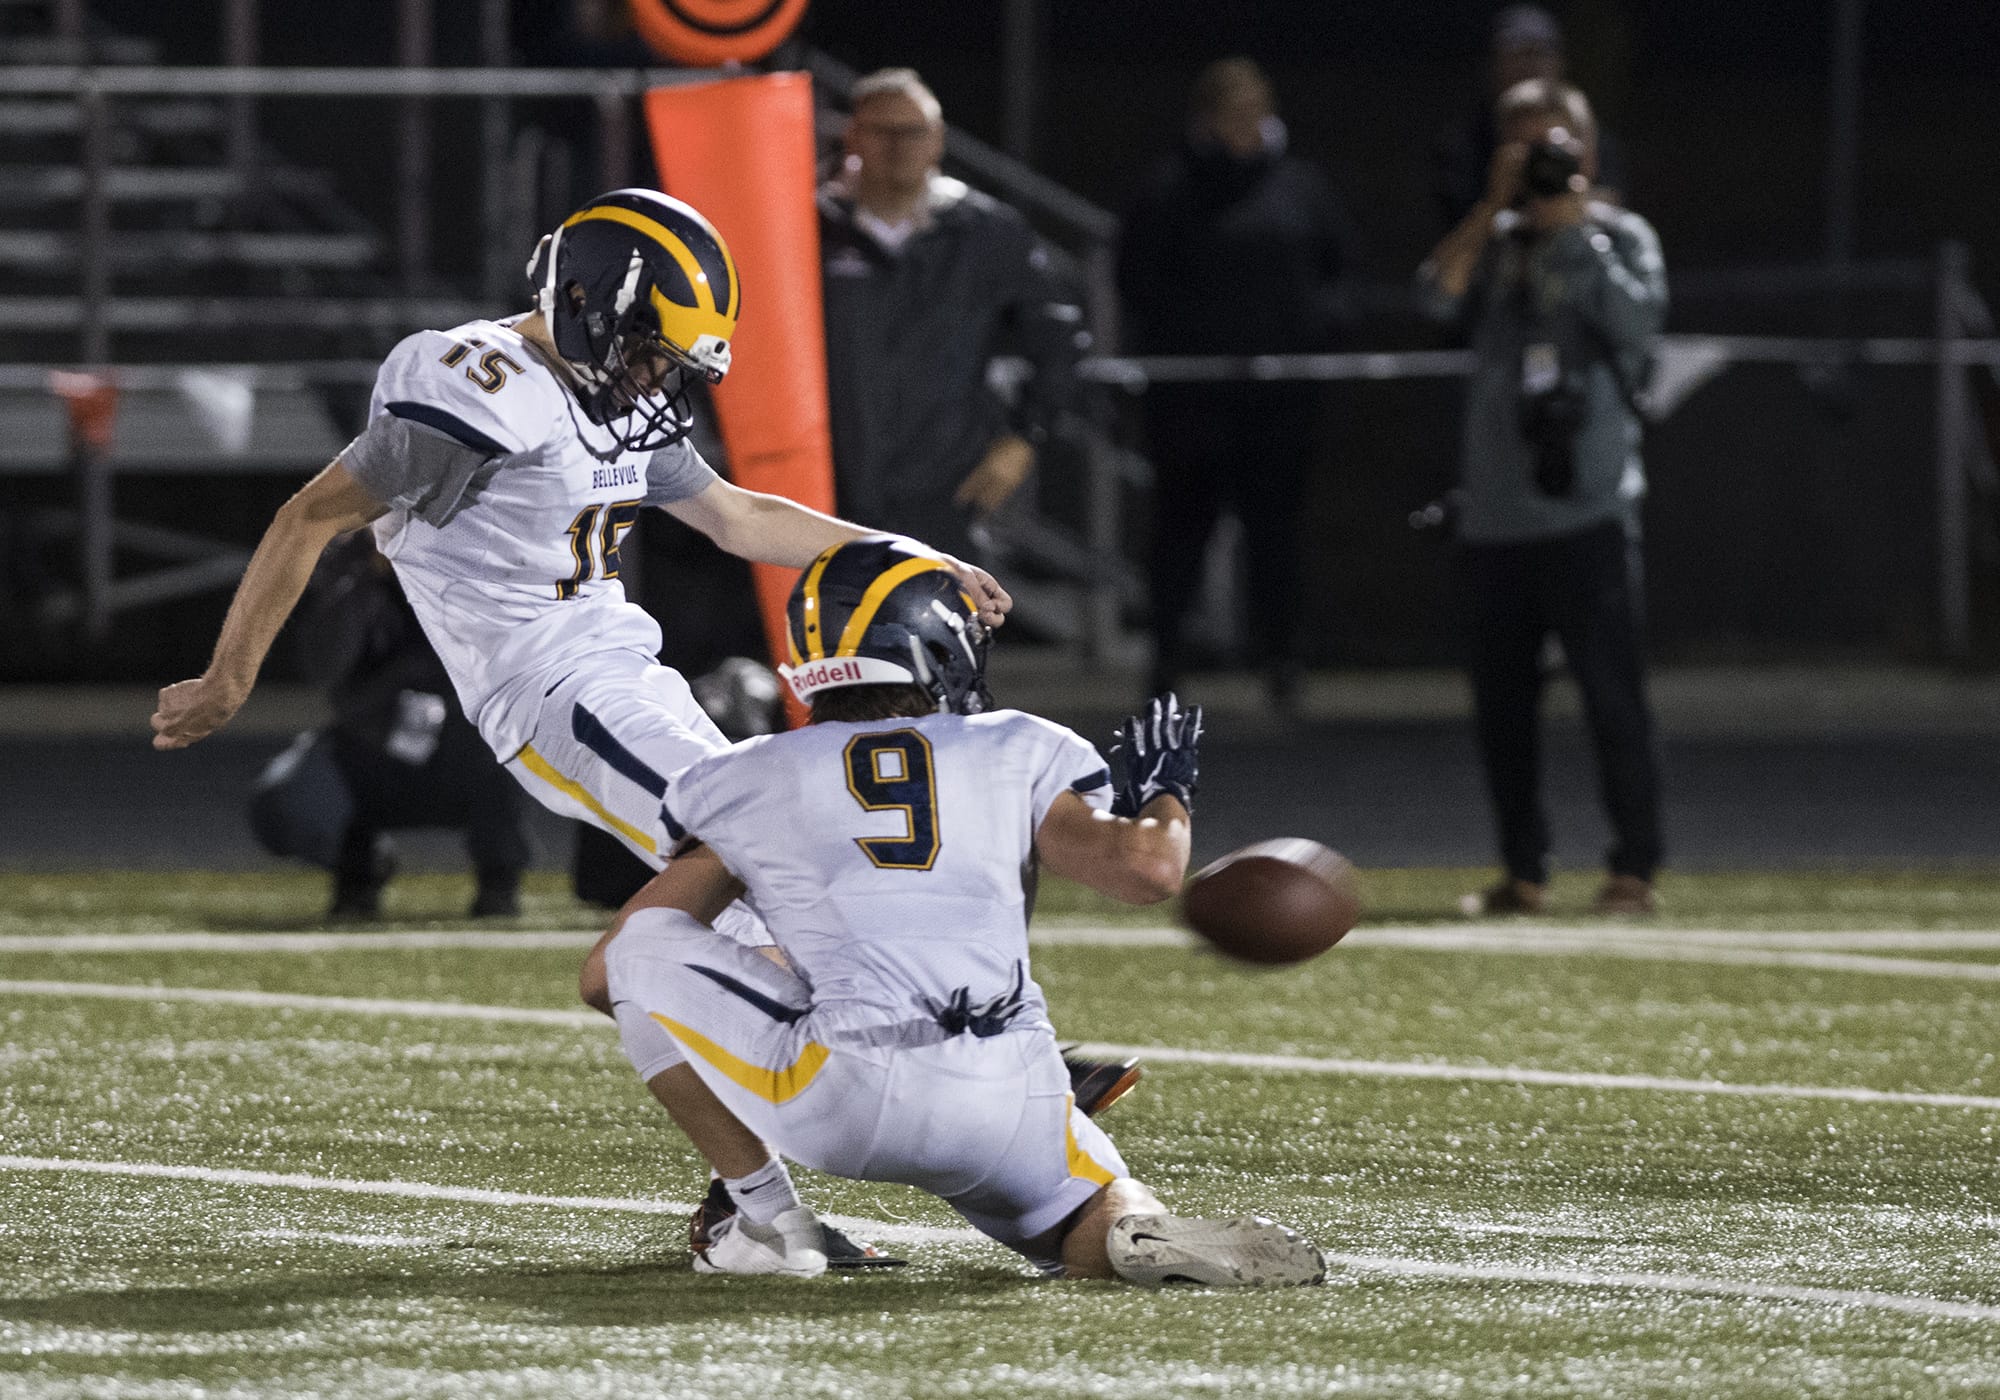 Bellevue's Jed Michael (15) kicks a field goal to beat Camas 38-25. Bellevue's football program is on the rebound after facing sanctions for violations that included recruiting of players.